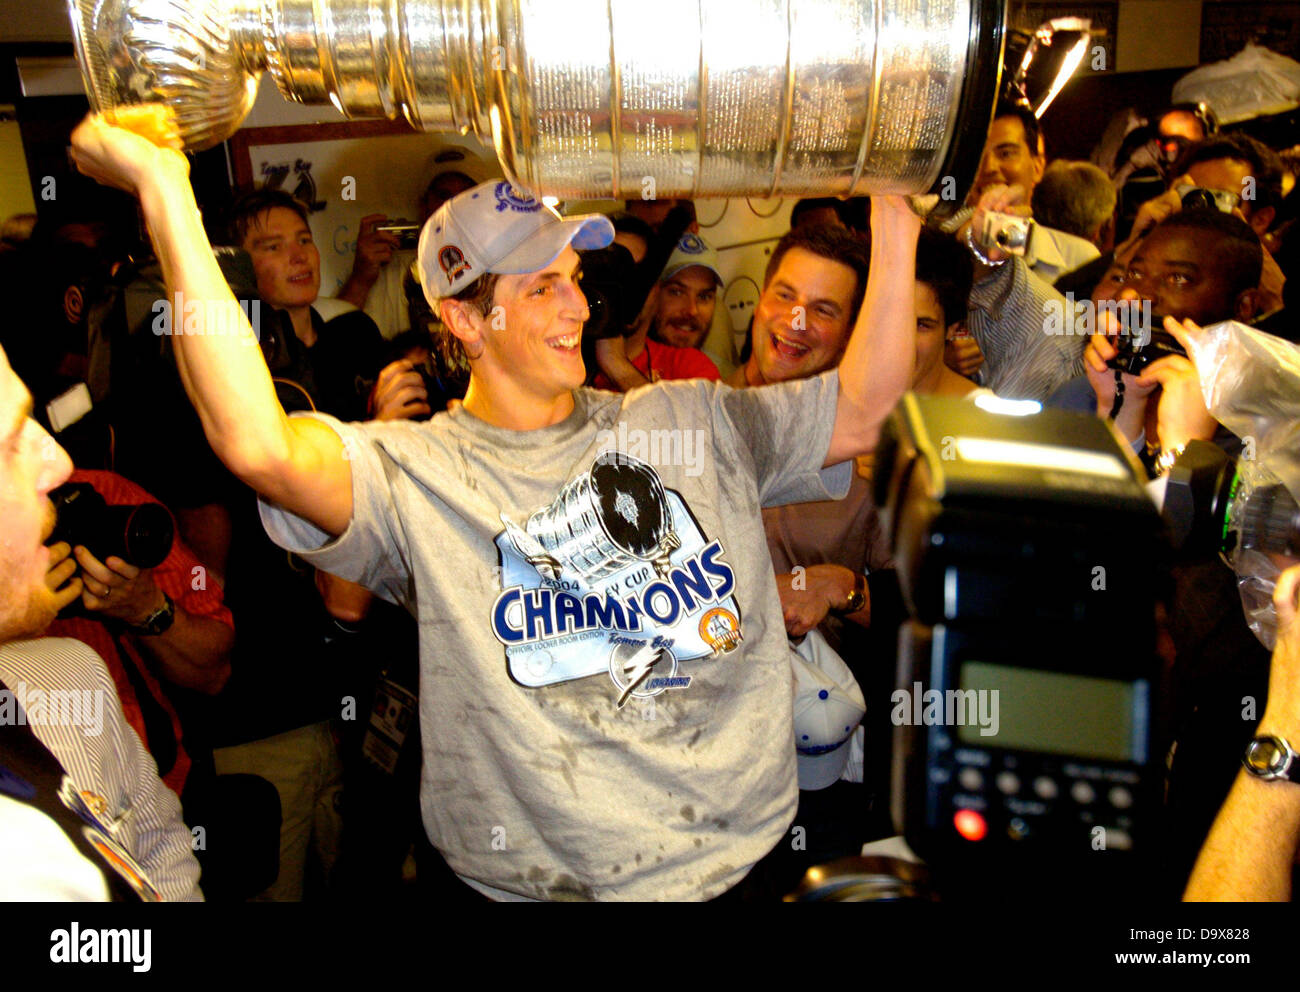 June 7, 2004 - Tampa, Florida, U.S. - DIRK SHADD   |   Times  .Tampa Bay Lightning Vinny Lecavalier hoists the Stanley Cup in the locker room after beating the Calgary Flames in game seven of the Stanley Cup Final at the St. Pete Times Forum on 6/7/04. The Tampa Bay Lightning will use its compliance buyout on captain Vinny Lecavalier, ending a relationship with the player who has been an iconic community figure since he was the No. 1 overall pick of the 1998 draft. He will be a free agent as of July 5, able to sign with any team except Tampa Bay. (Credit Image: © Dirk Shadd/Tampa Bay Times/ZUM Stock Photo